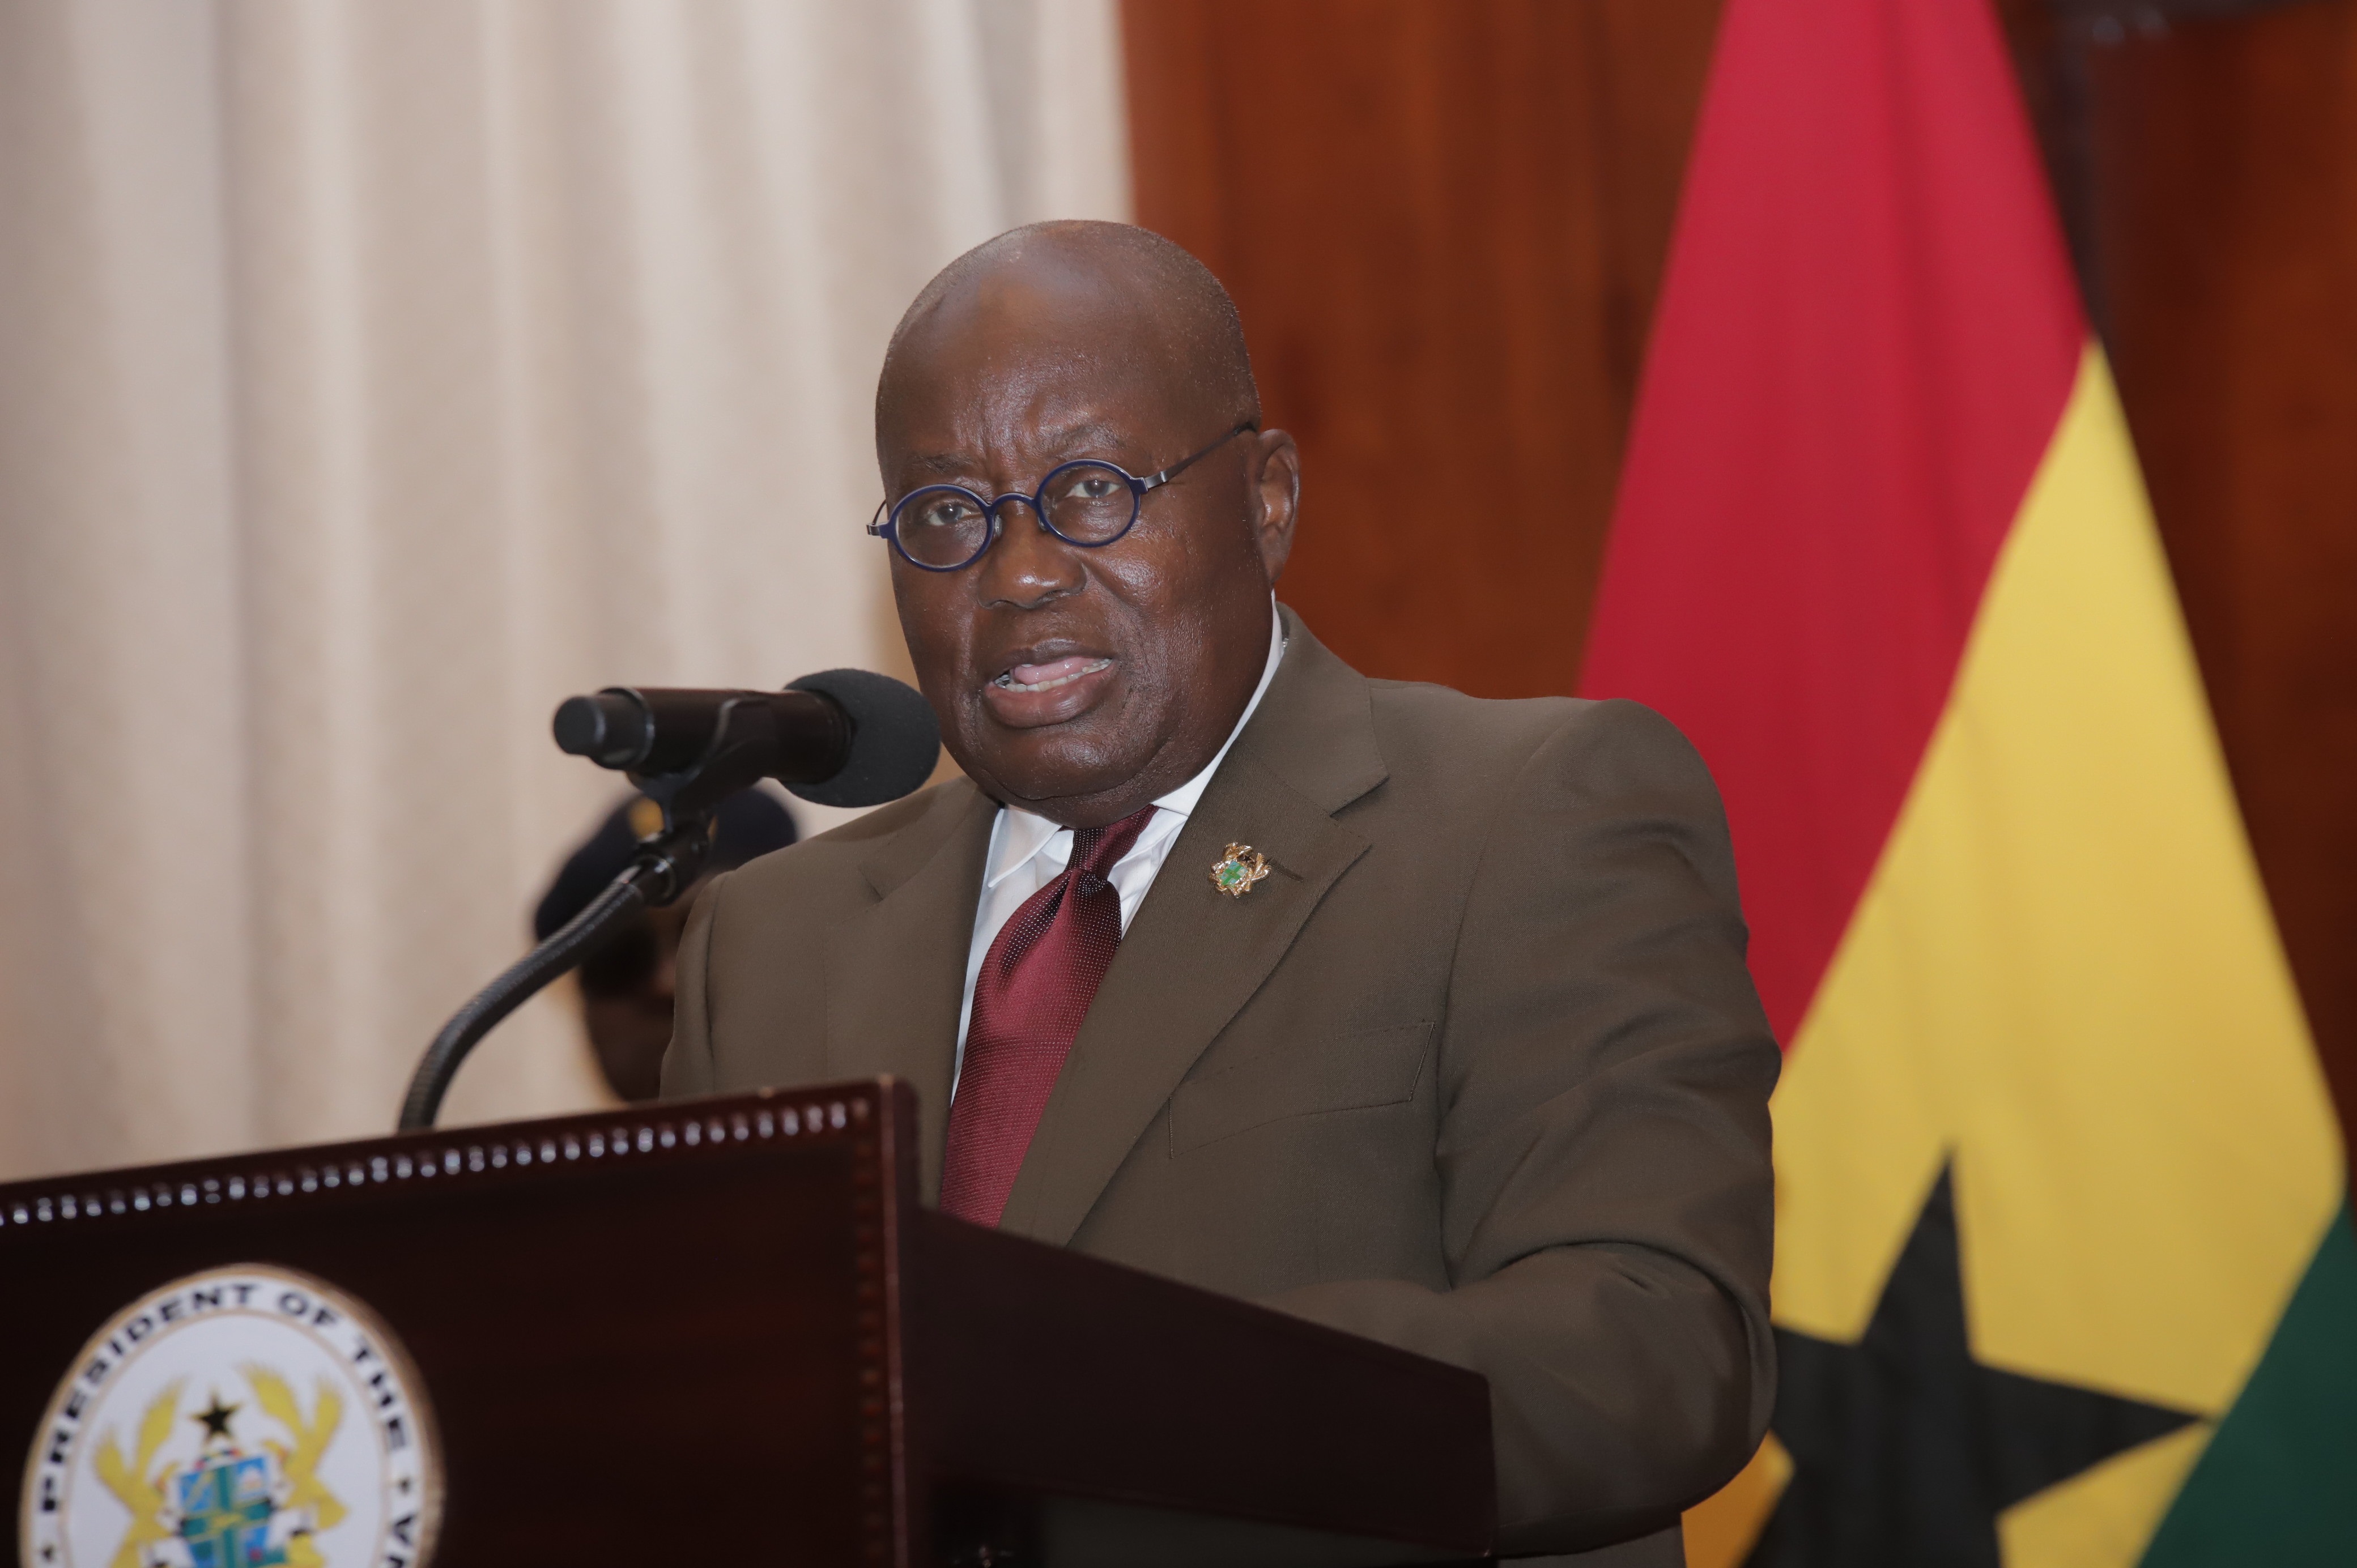 President Nana Addo Dankwa Akufo-Addo urges Free SHS beneficiaries to focus on their studies and leave policy debates to politicians